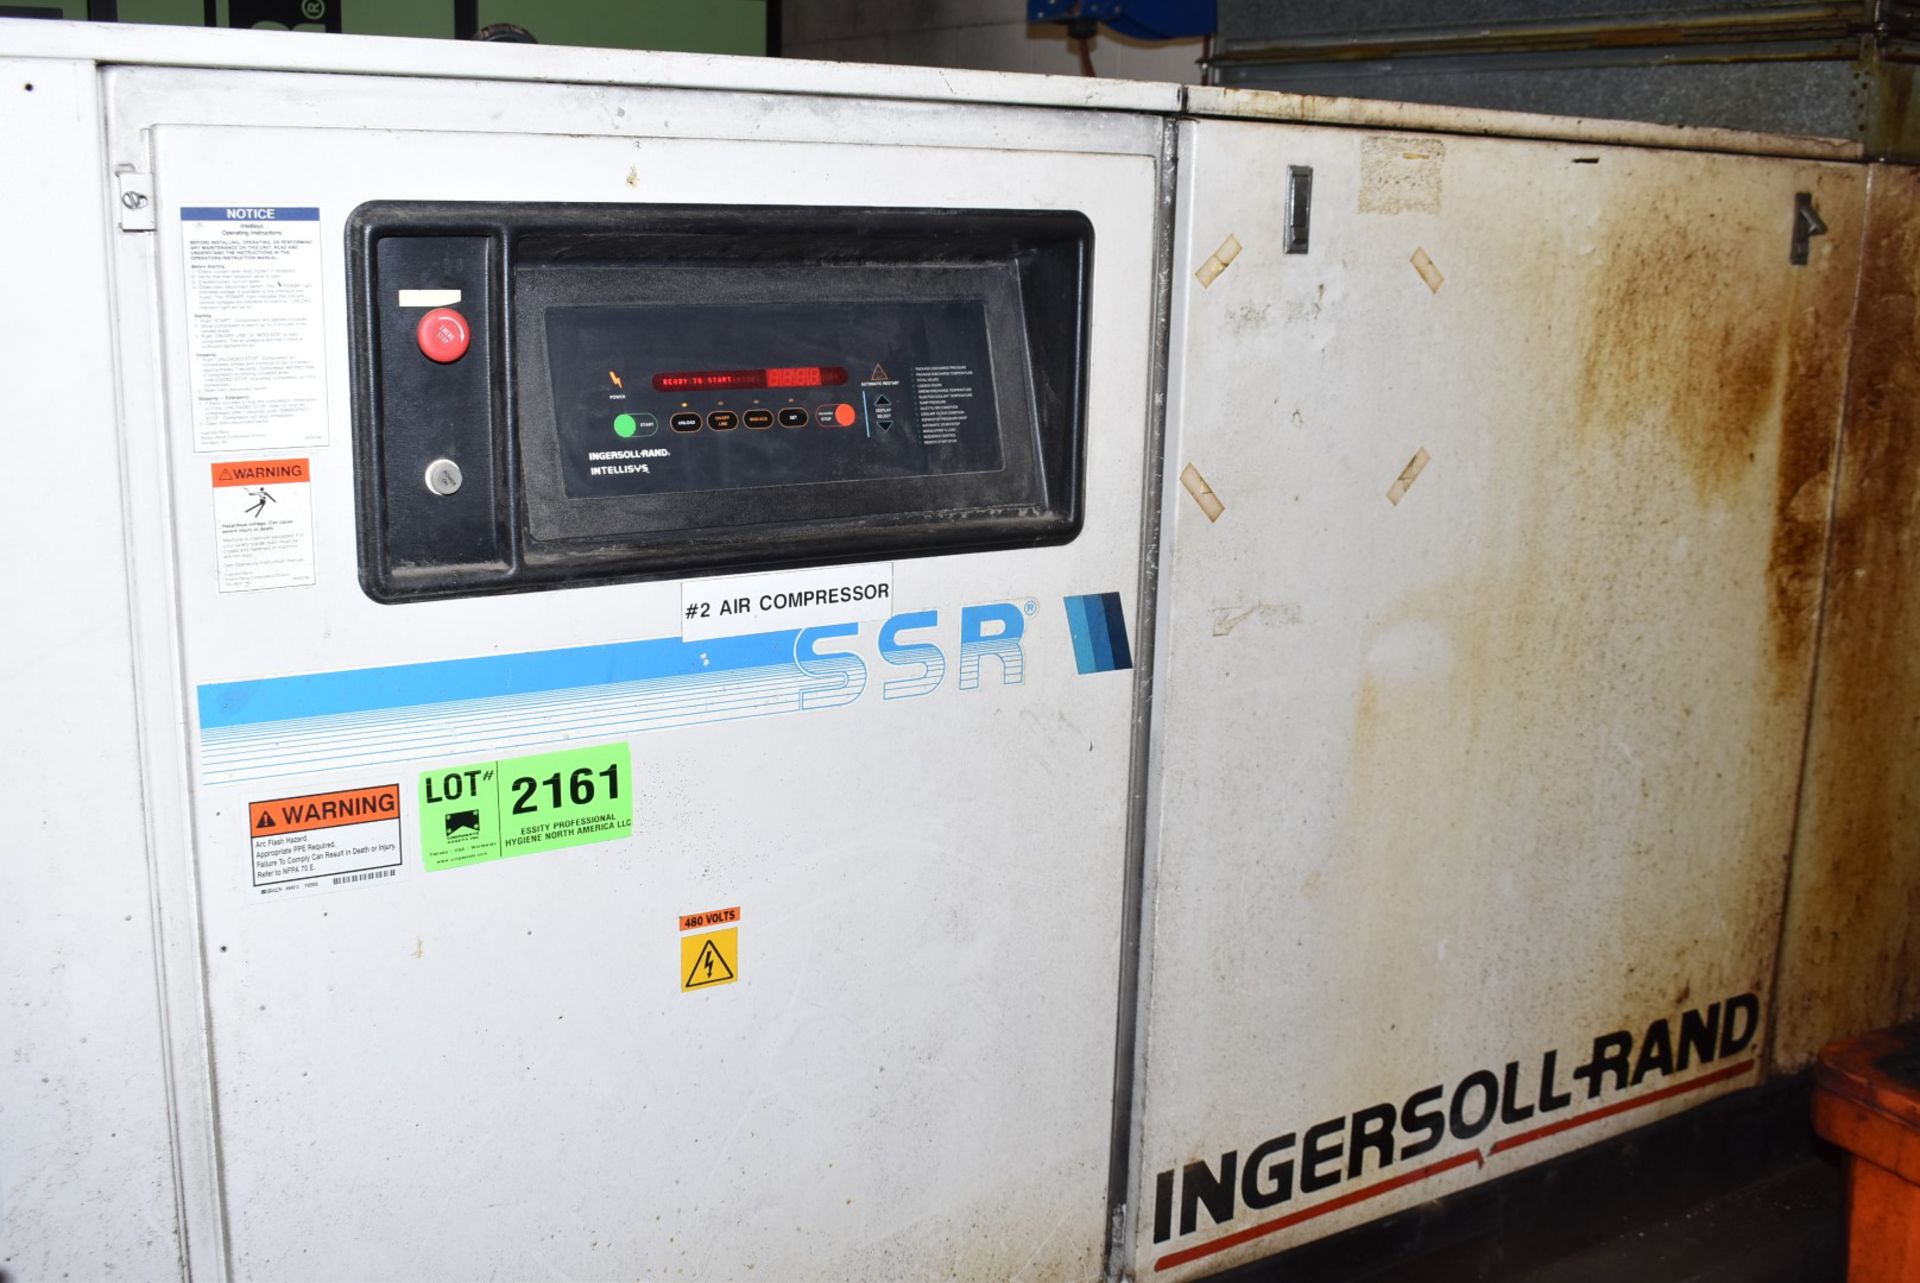 INGERSOLL RAND SSR-EP100 100 HP ROTARY SCREW TYPE AIR COMPRESSOR WITH 446 CFM @ 125 PSI CAPACITY,